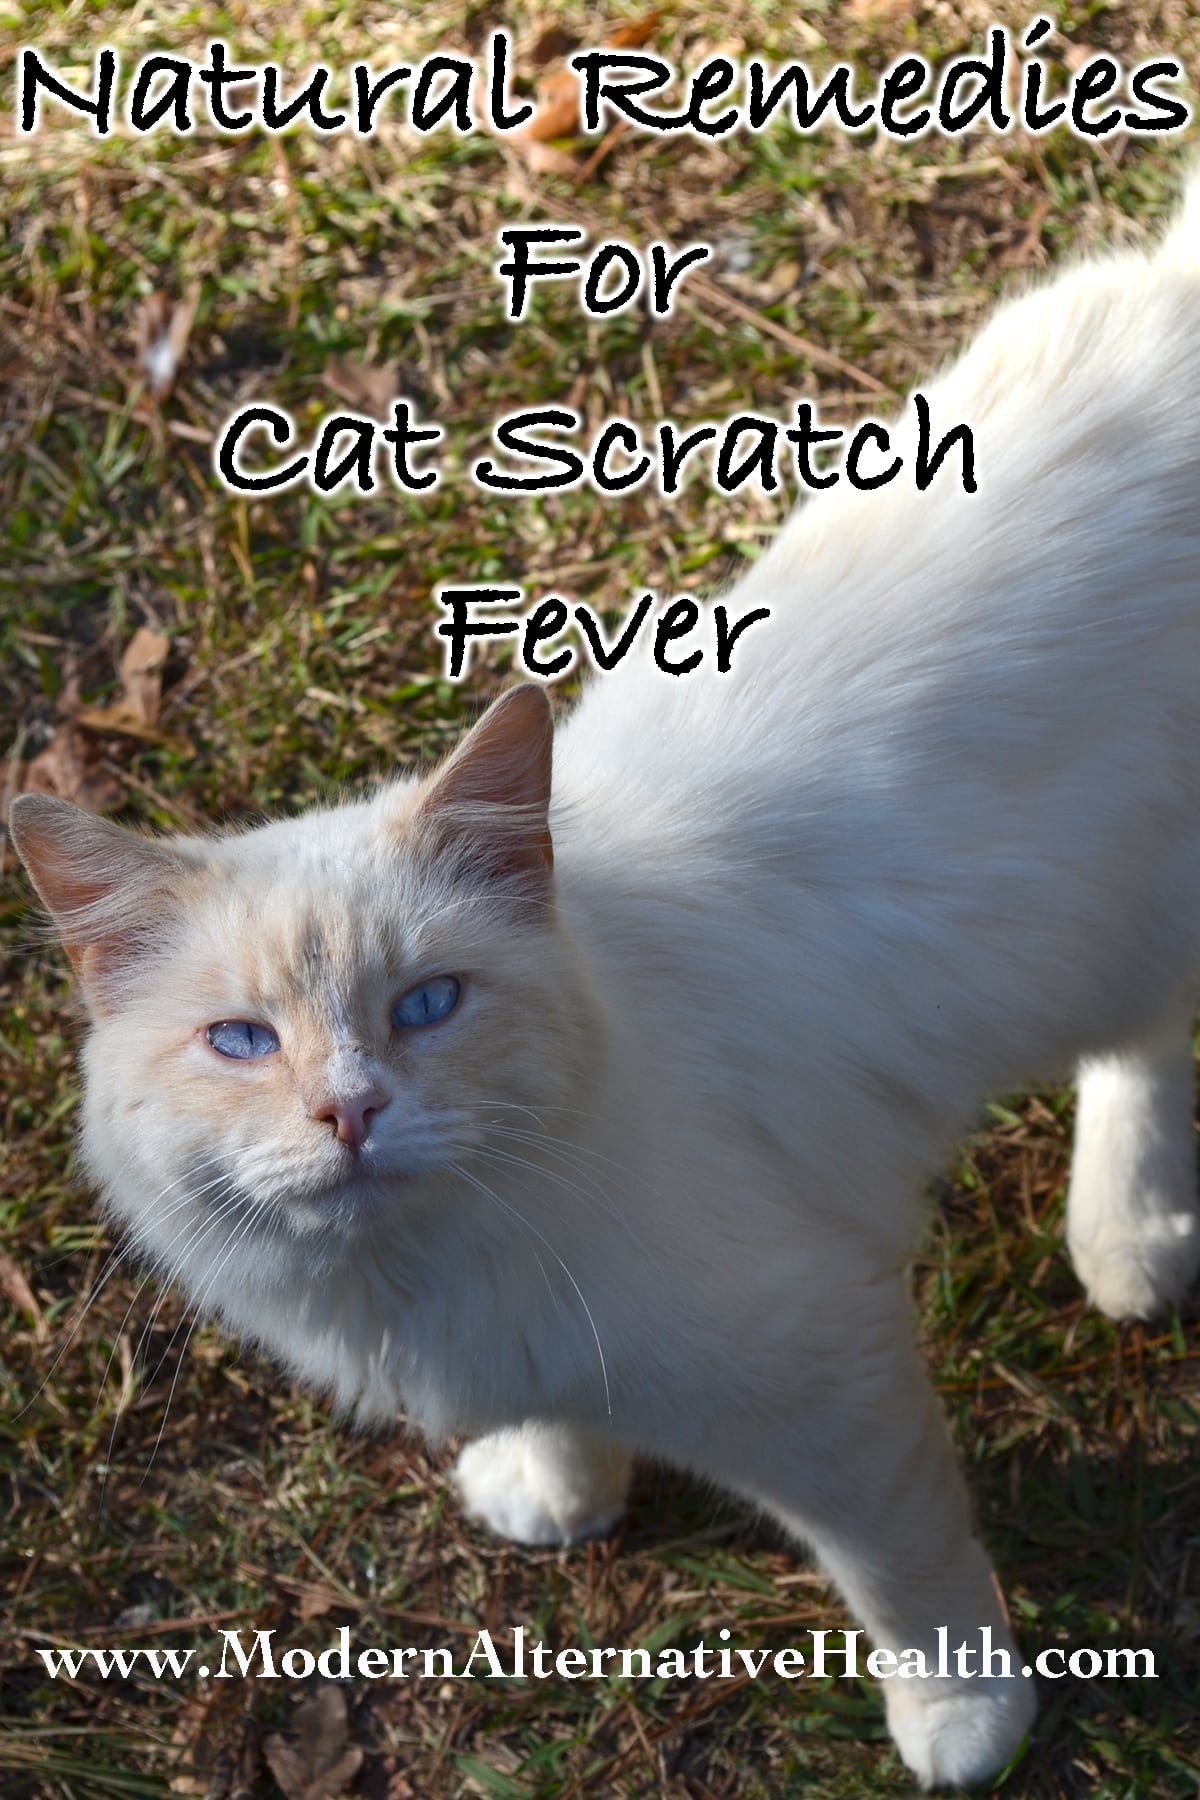 Natural Remedies for Cat Scratch Fever